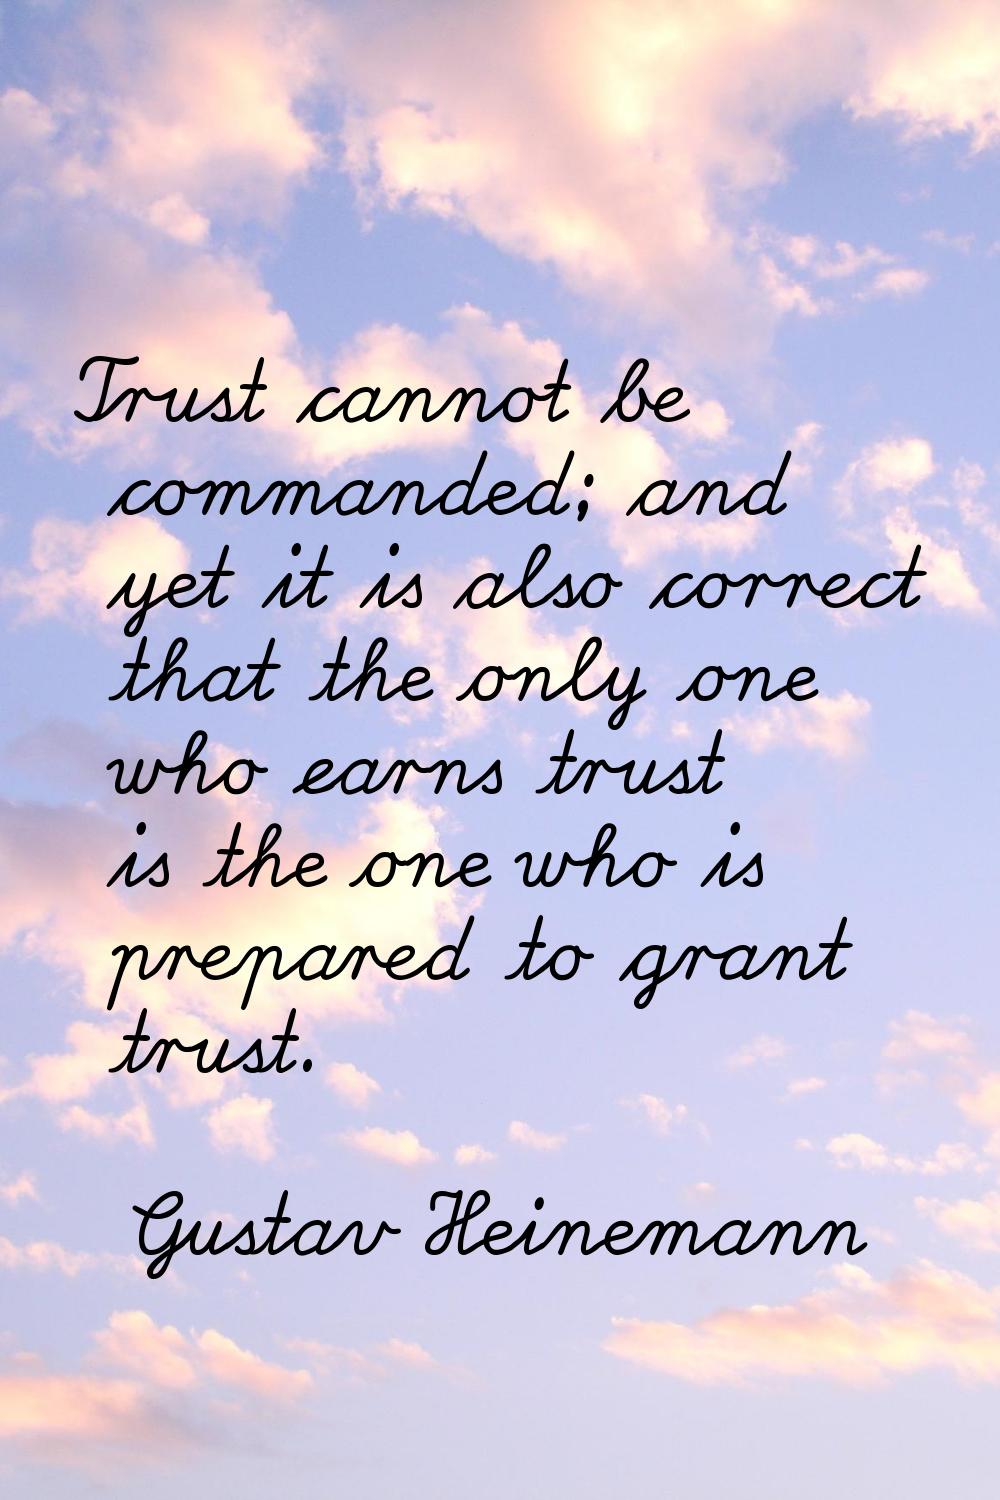 Trust cannot be commanded; and yet it is also correct that the only one who earns trust is the one 